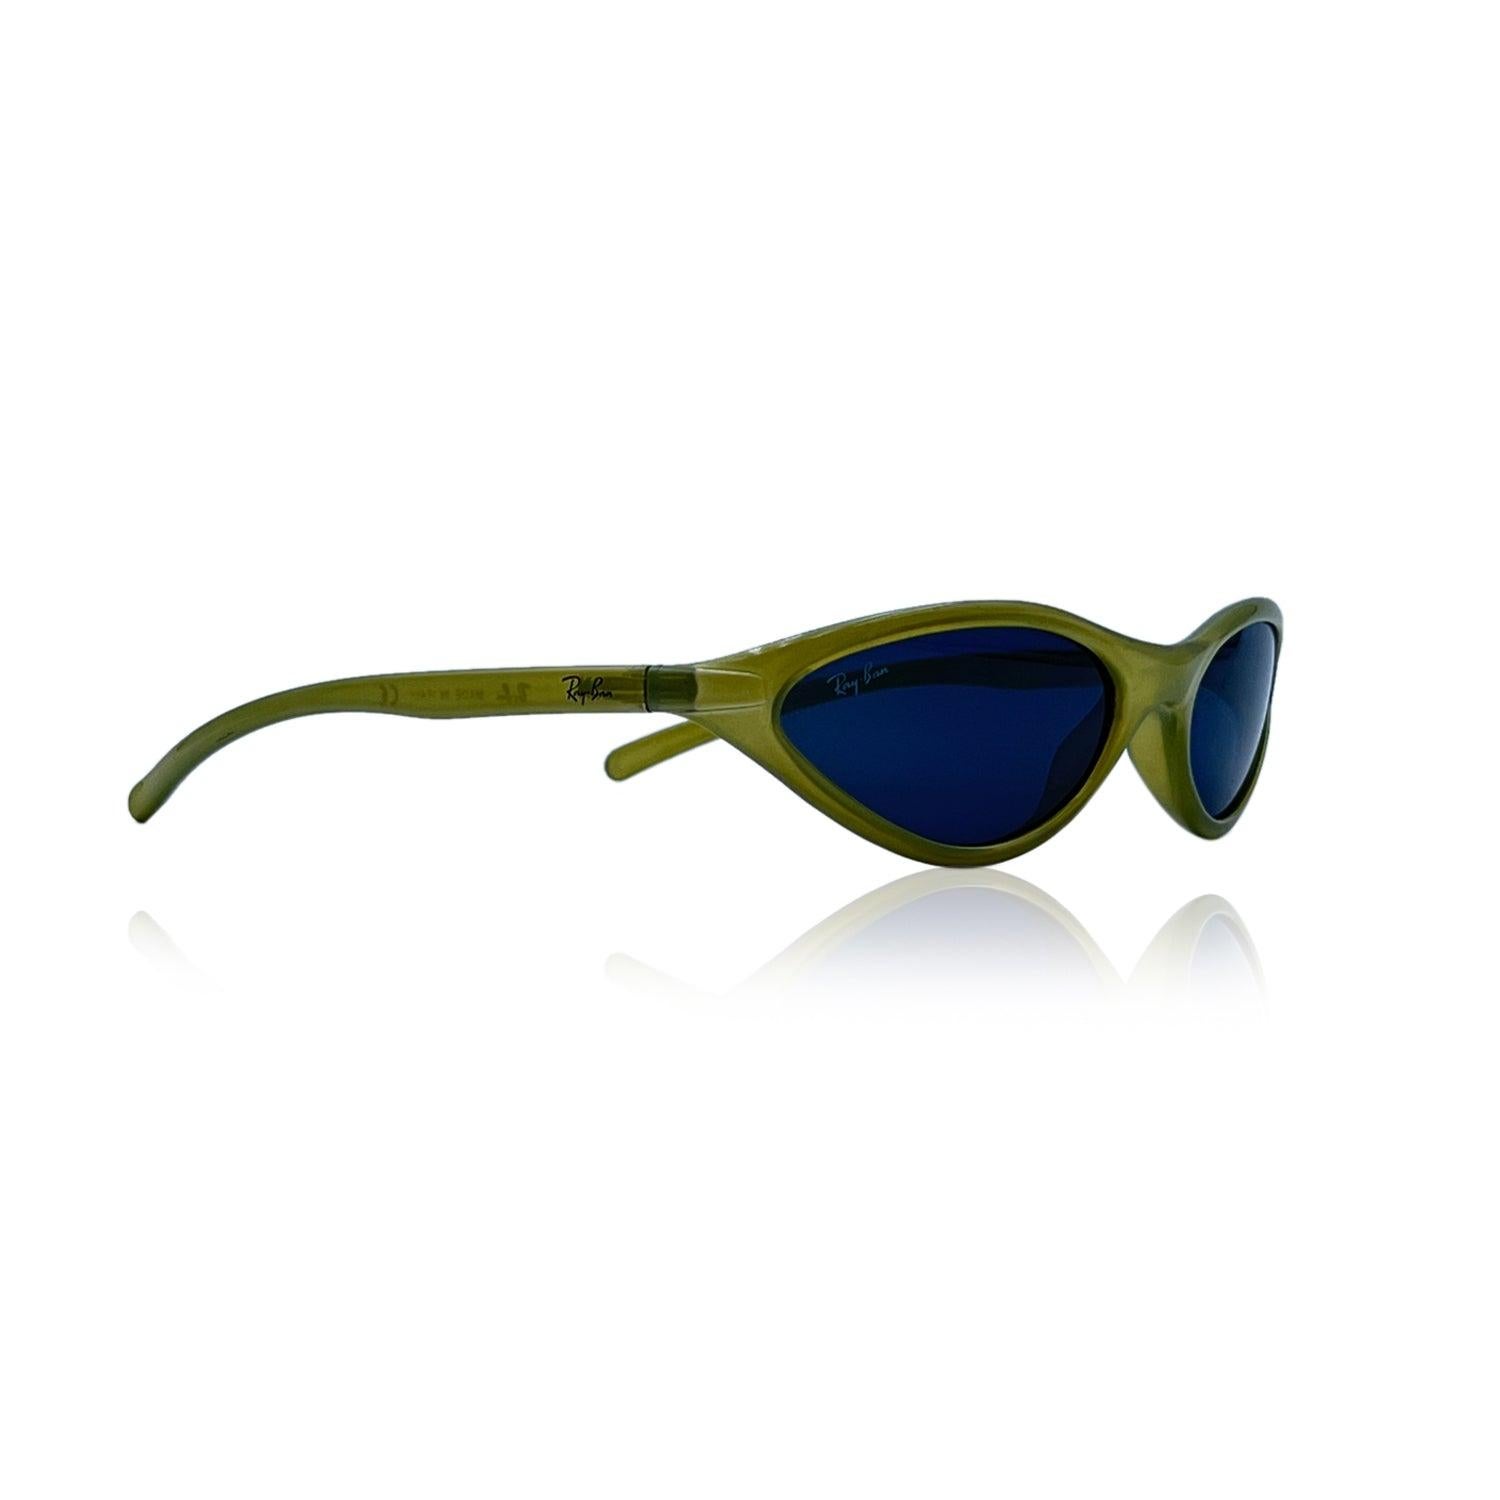 Vintage sunglasses by Ray-Ban Bausch & Lomb, mod. RB 4072. Green acetate frame with RAY-BAN signatures on temples. Wrap design. Grey original lens, with RB etched on both corners. Made in Italy Details MATERIAL: Acetate COLOR: Green MODEL: RB 4072